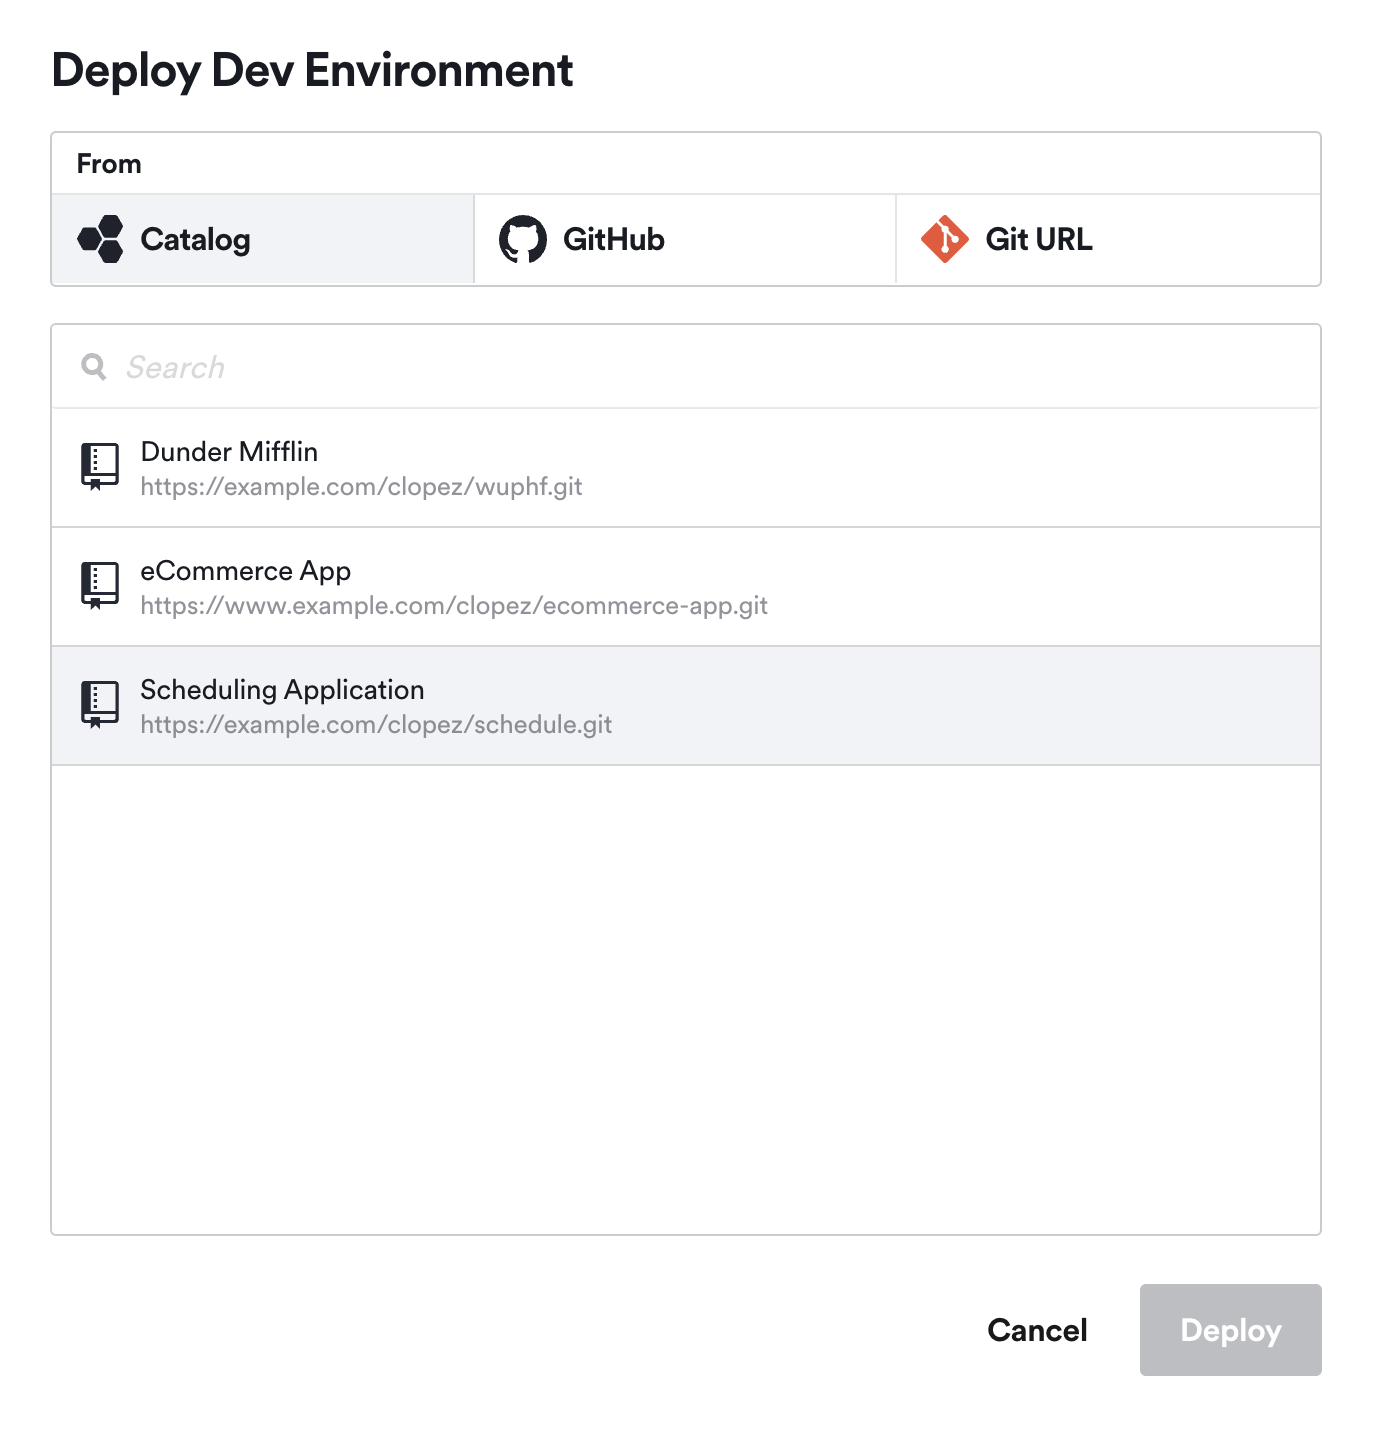 Deploy a development environment from the Catalog